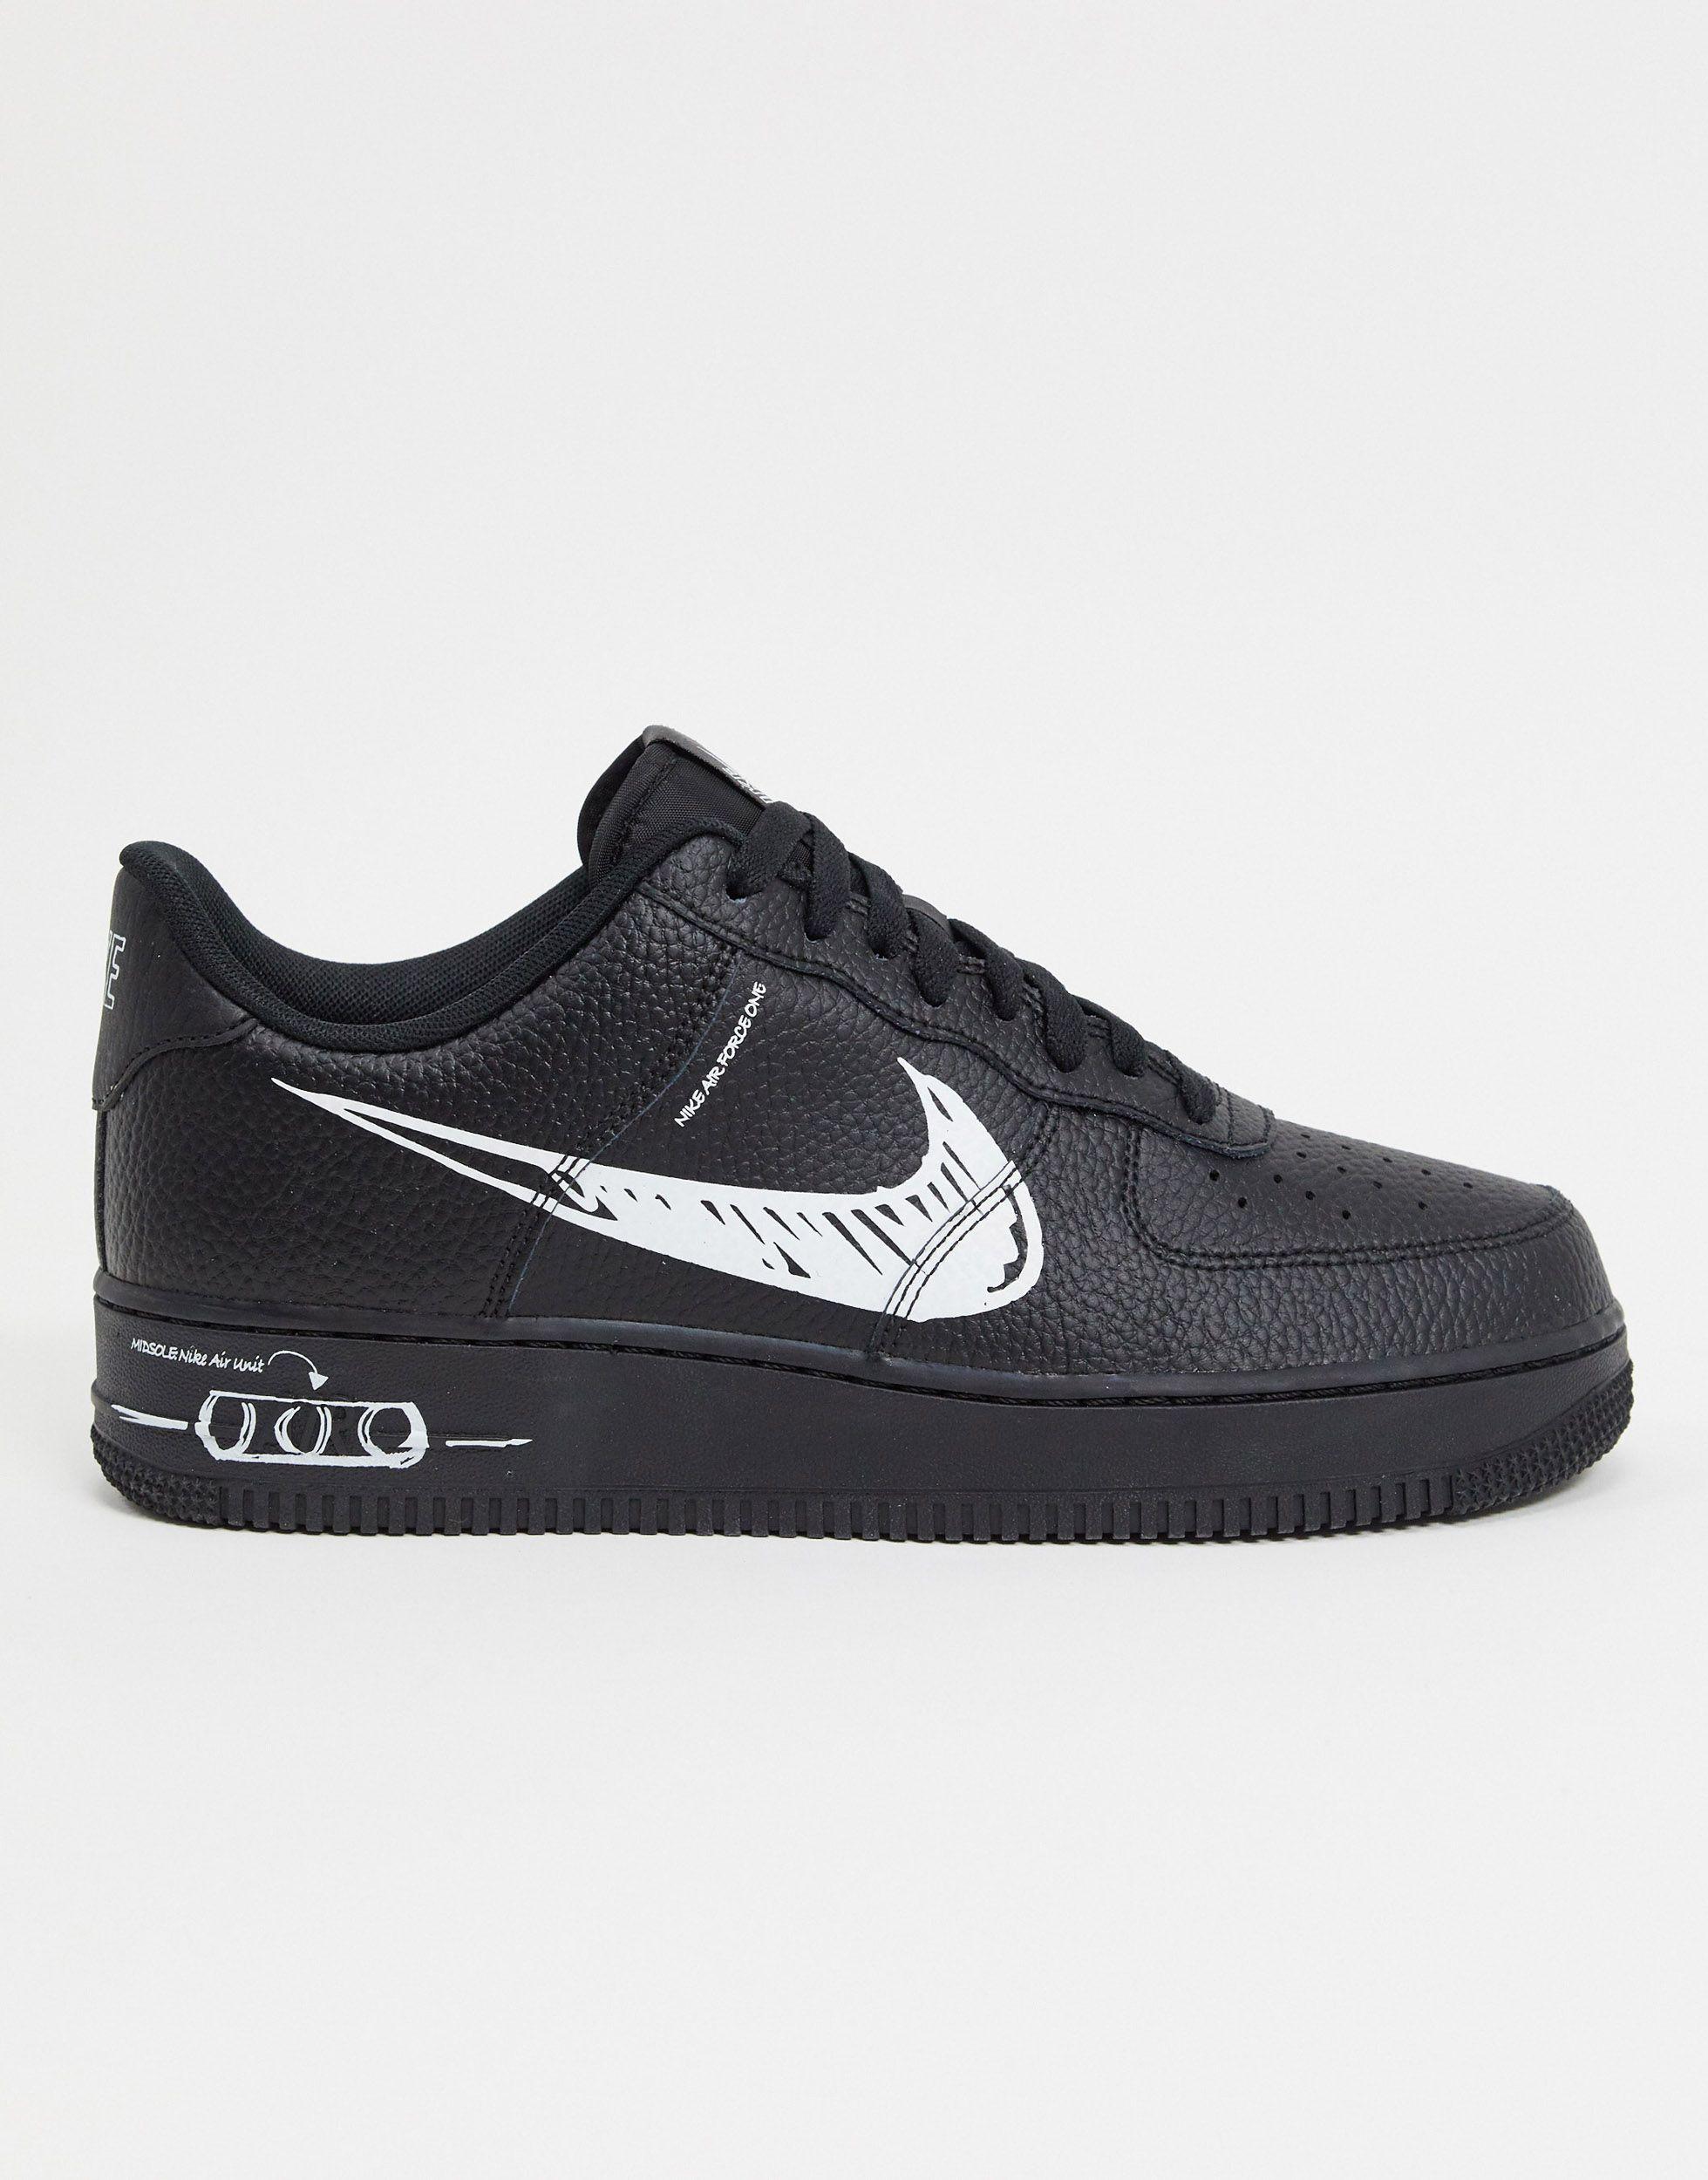 Nike Air Force 1 Lv8 Utility Sl Trainers in Black for Men - Lyst